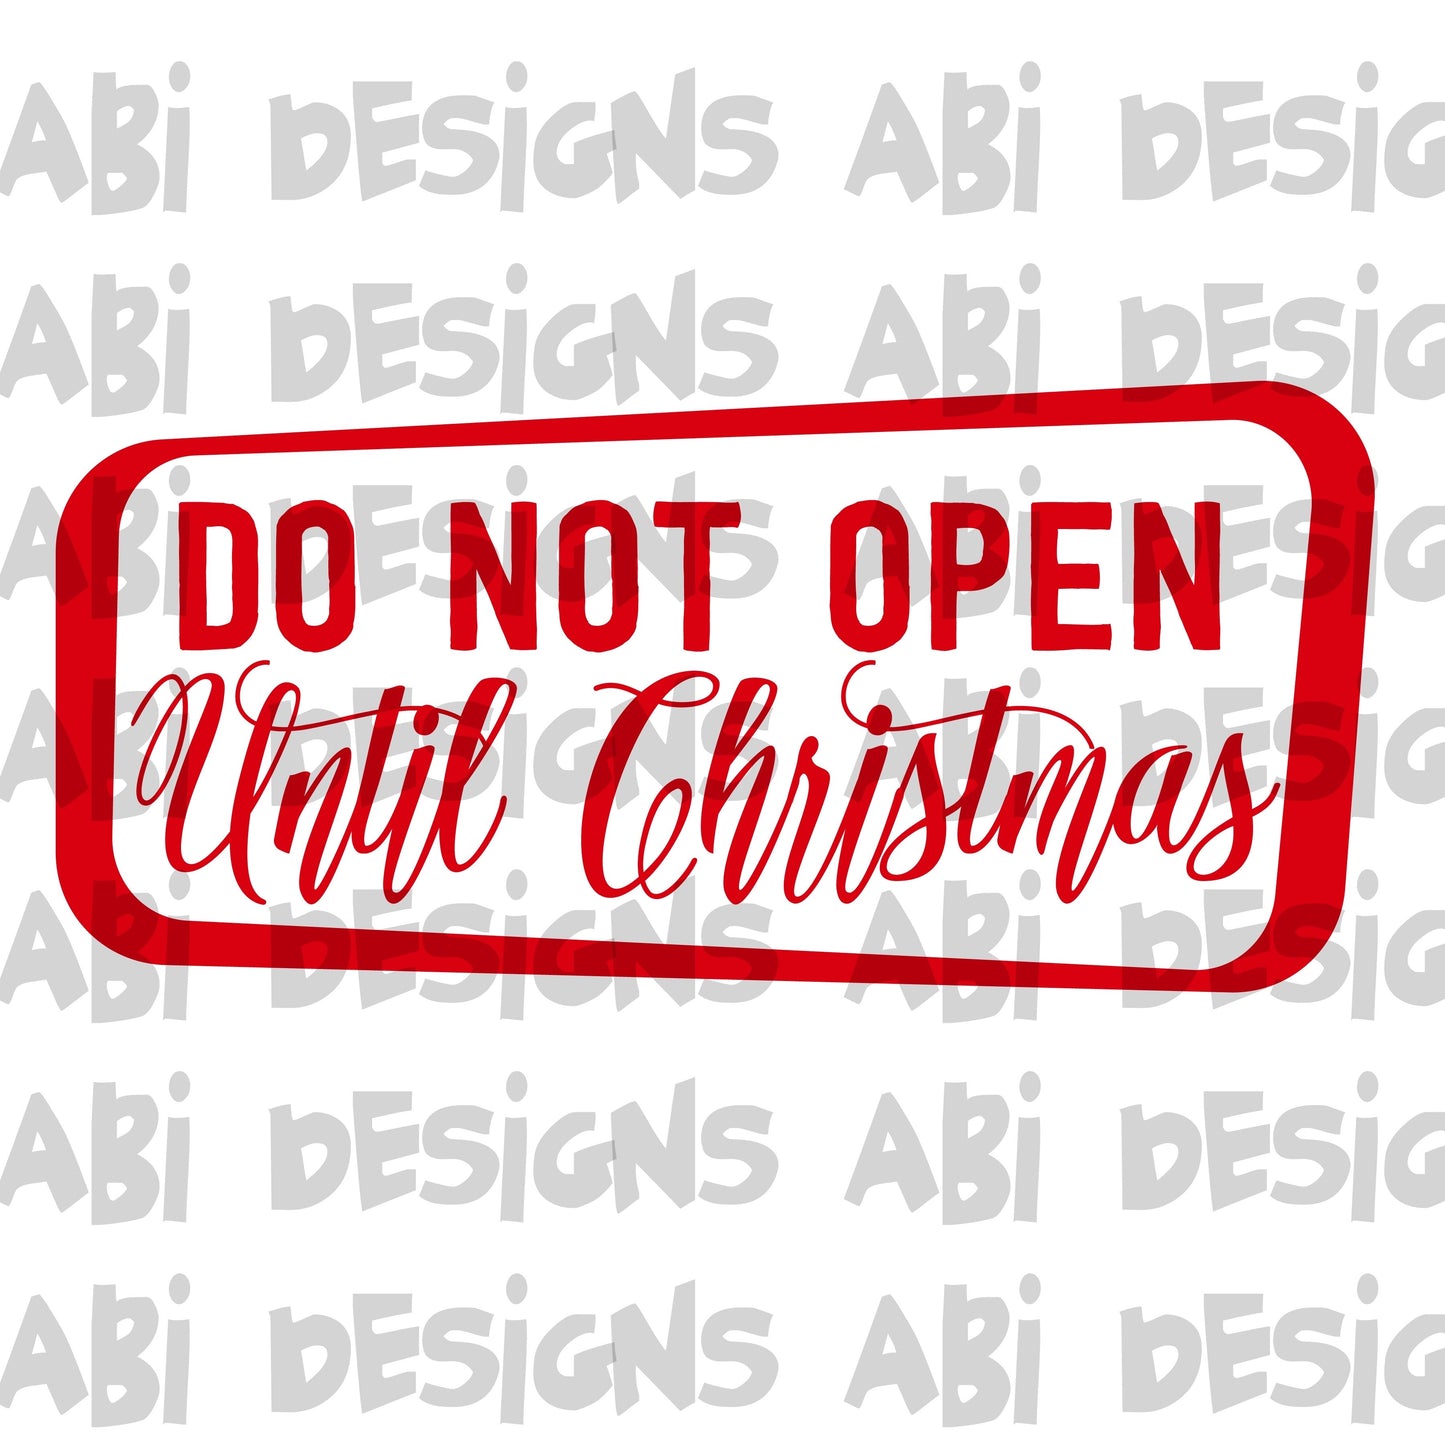 Do not open until Christmas-Sublimation